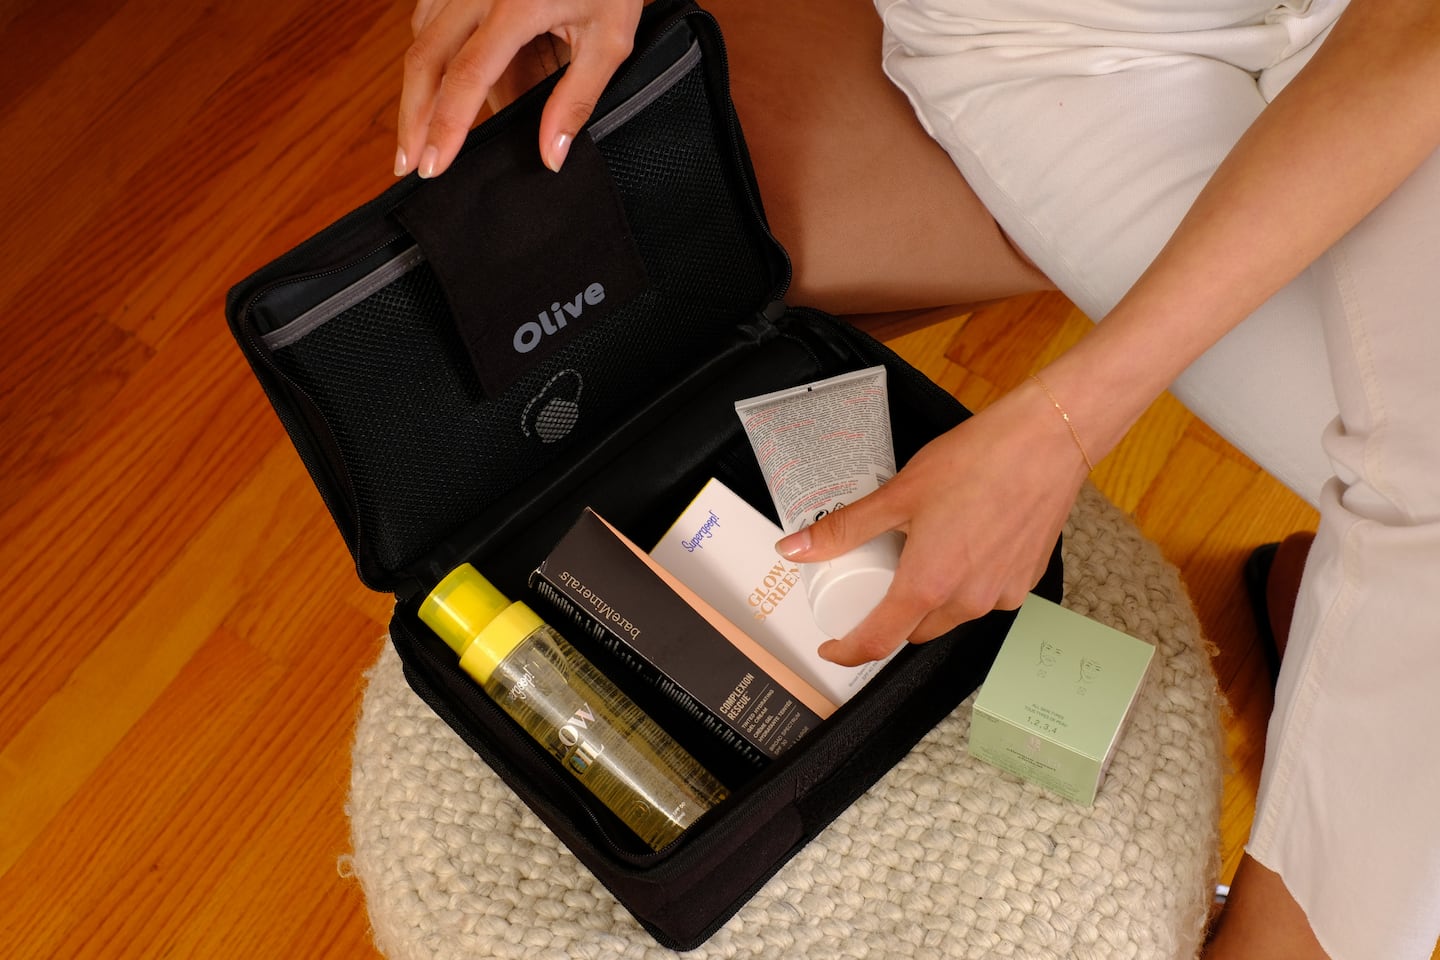 Olive beauty tote